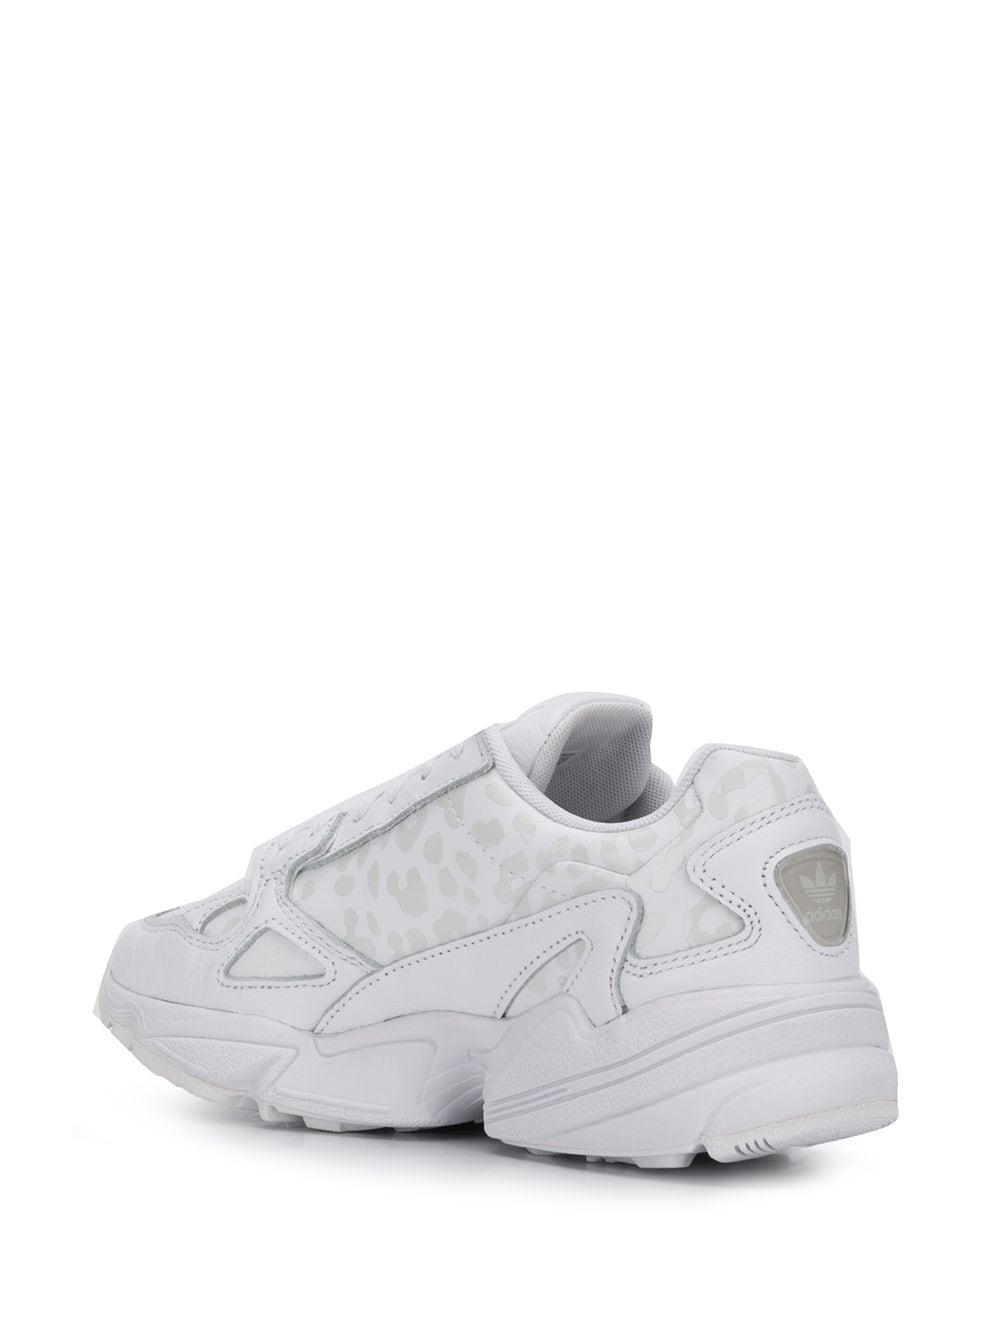 adidas Leather Falcon Leopard Print Sneakers in White | Lyst UK